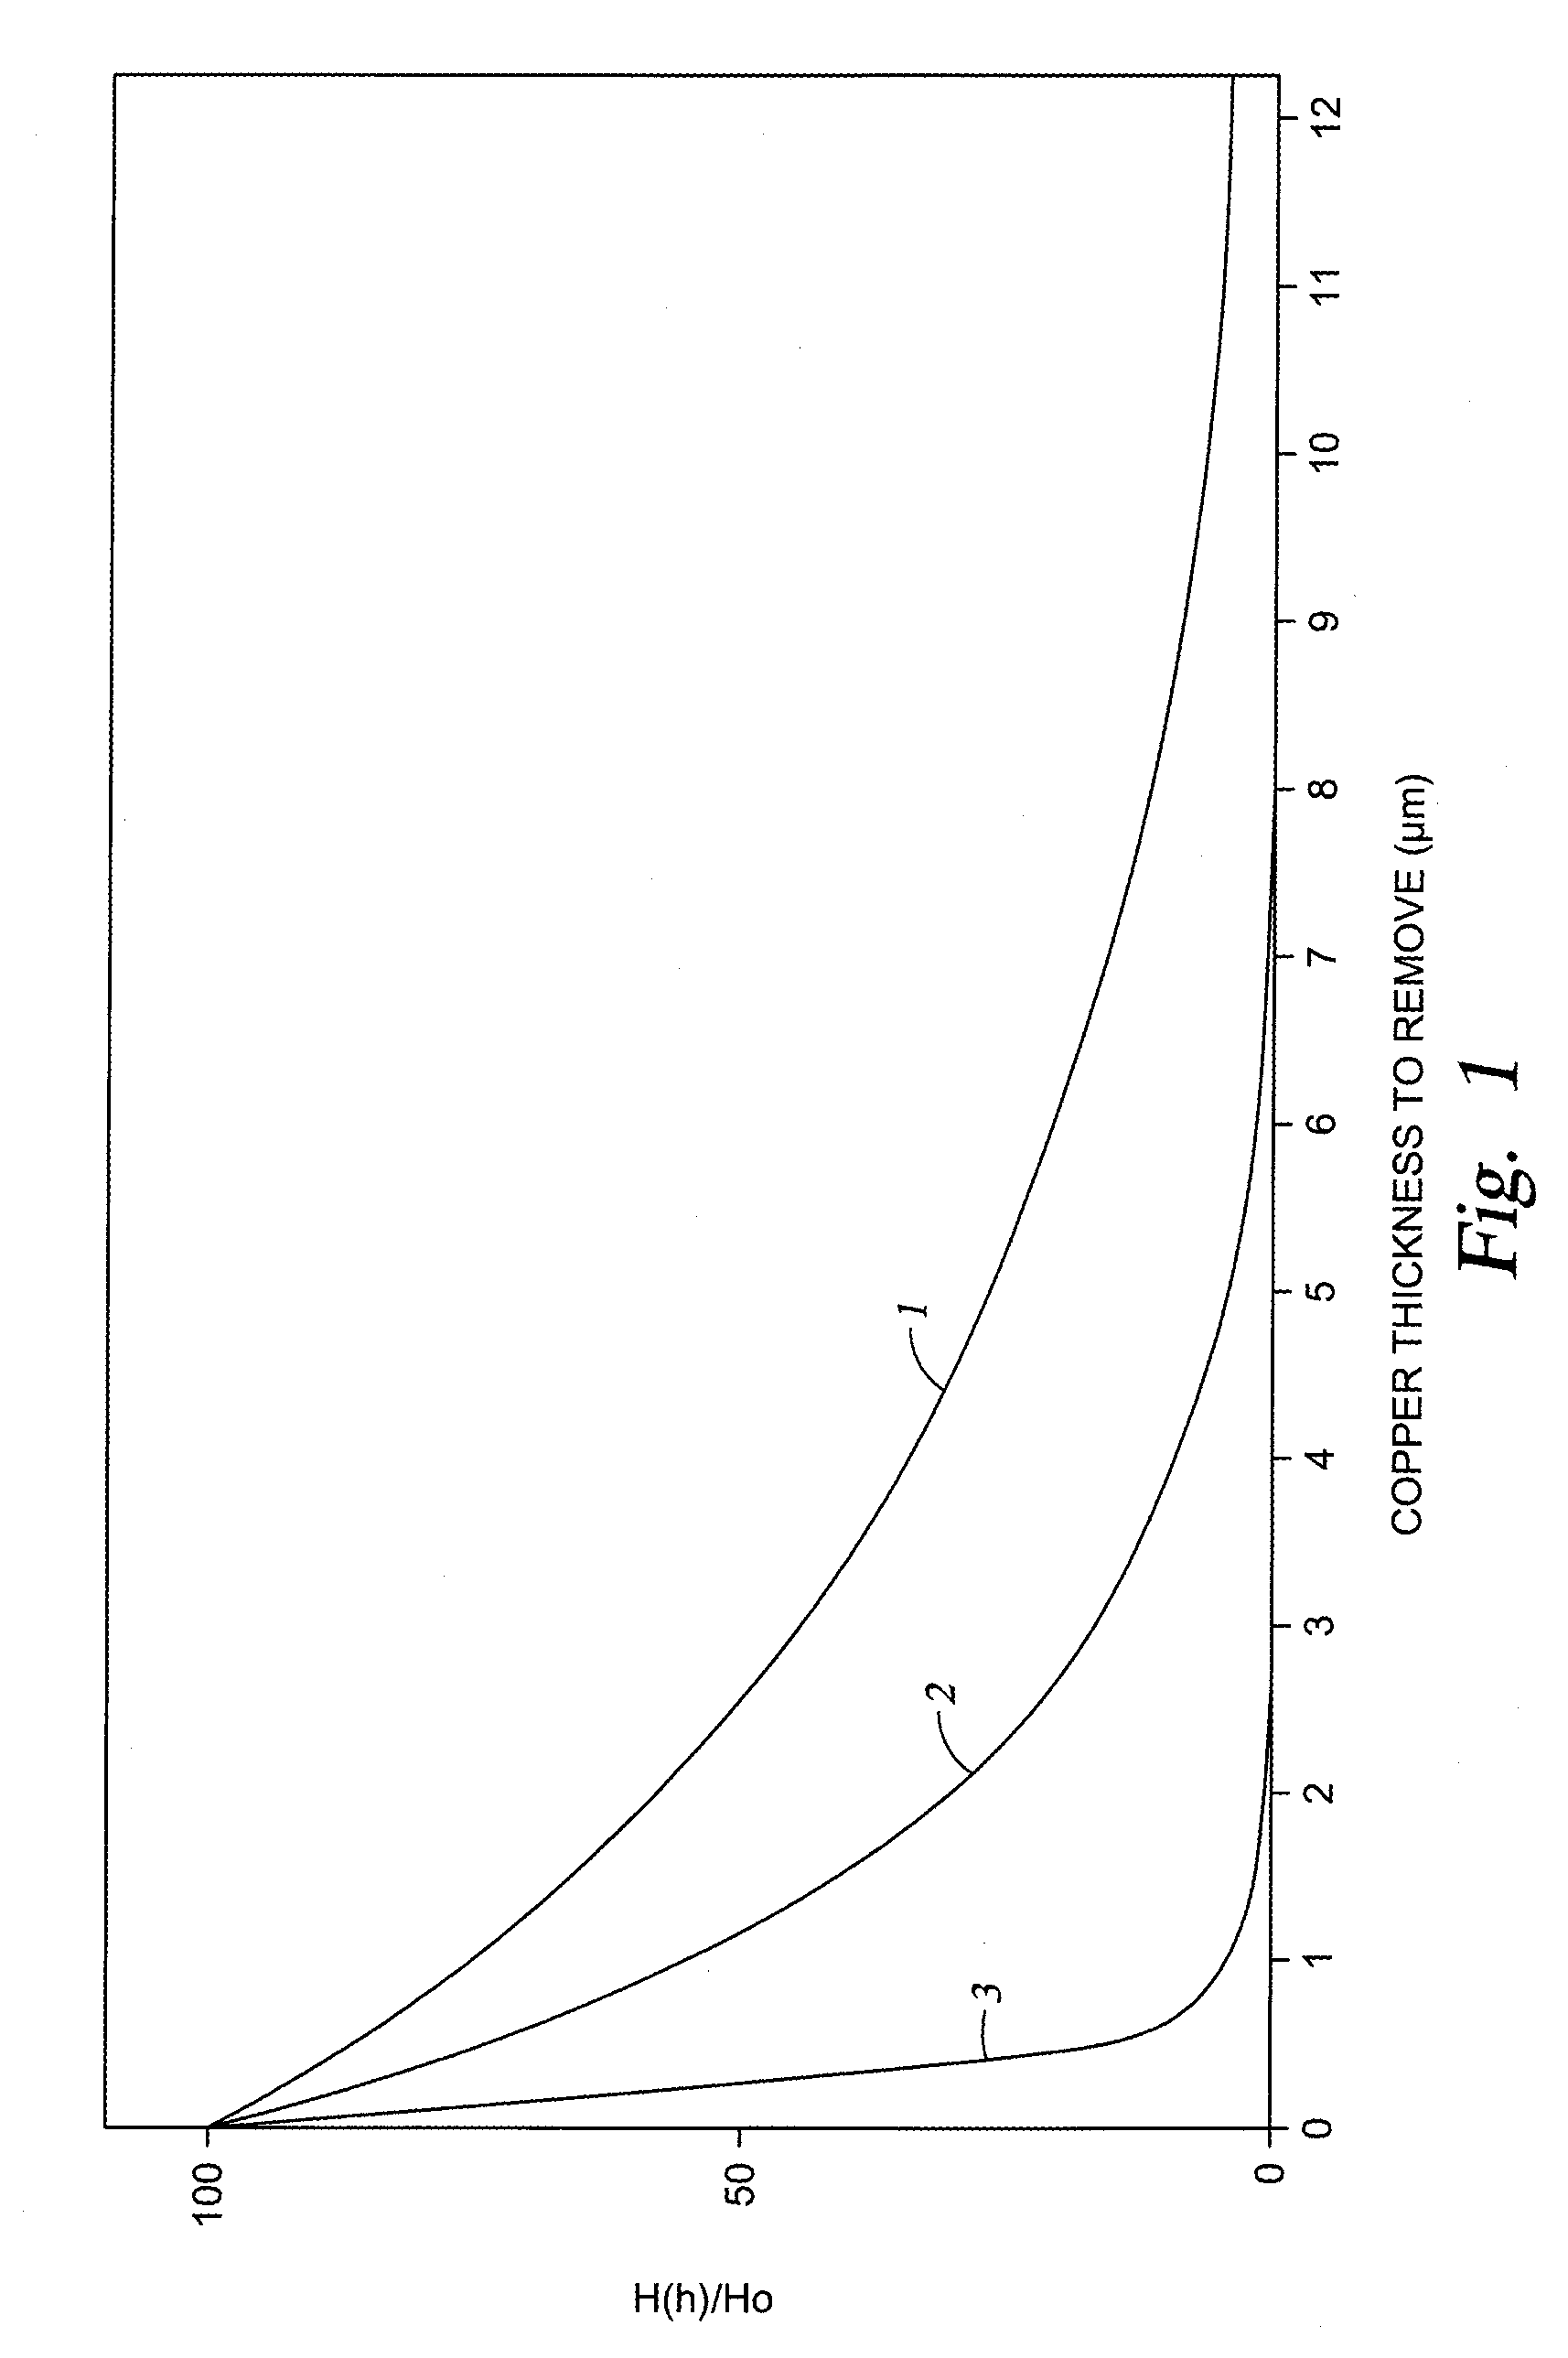 Method and apparatus for electropolishing